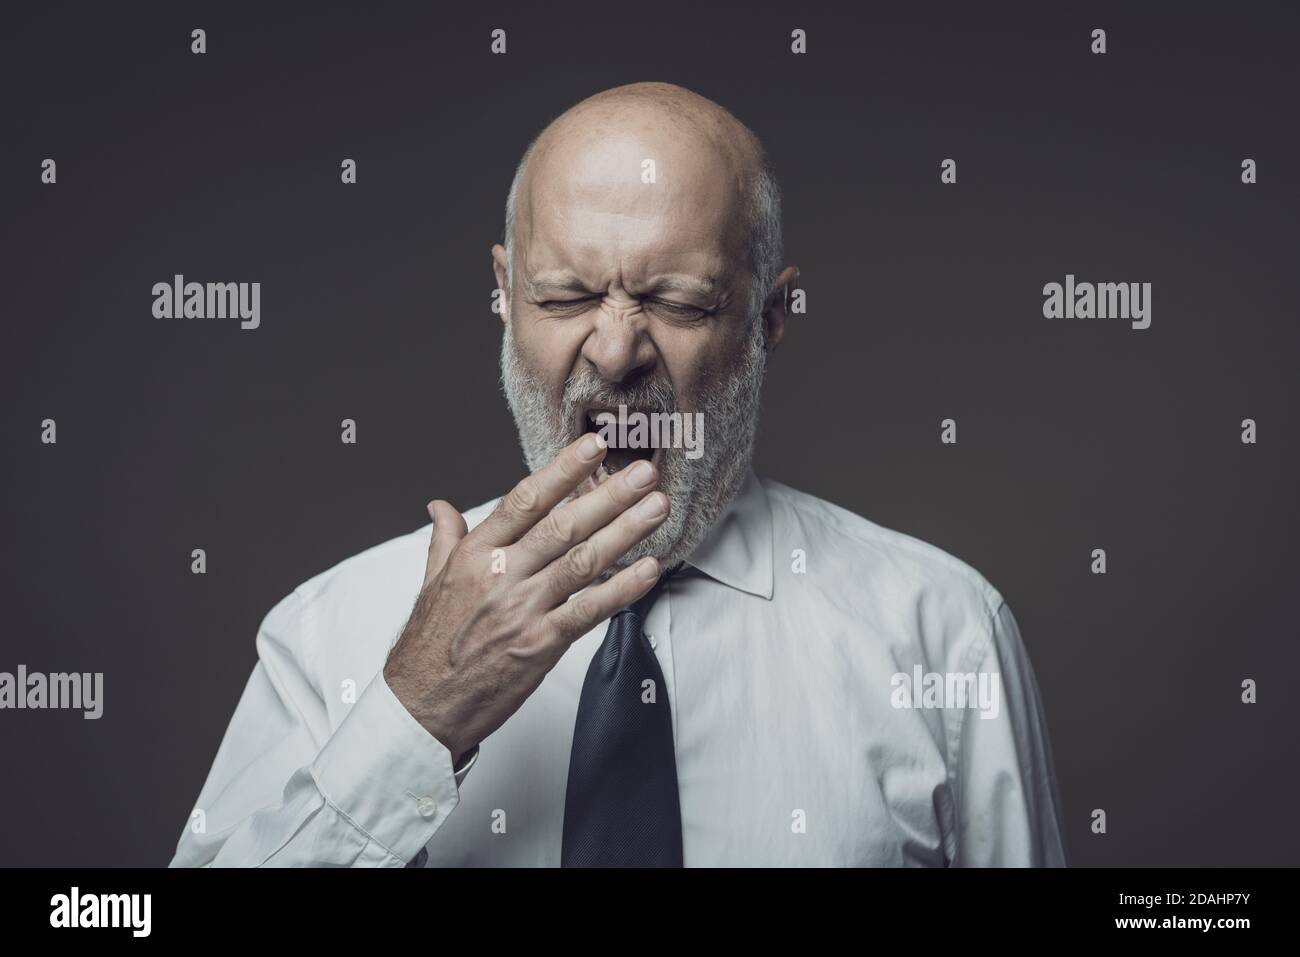 Lazy tired middle-aged businessman yawning and feeling sleepy, he is covering his mouth with his hand Stock Photo